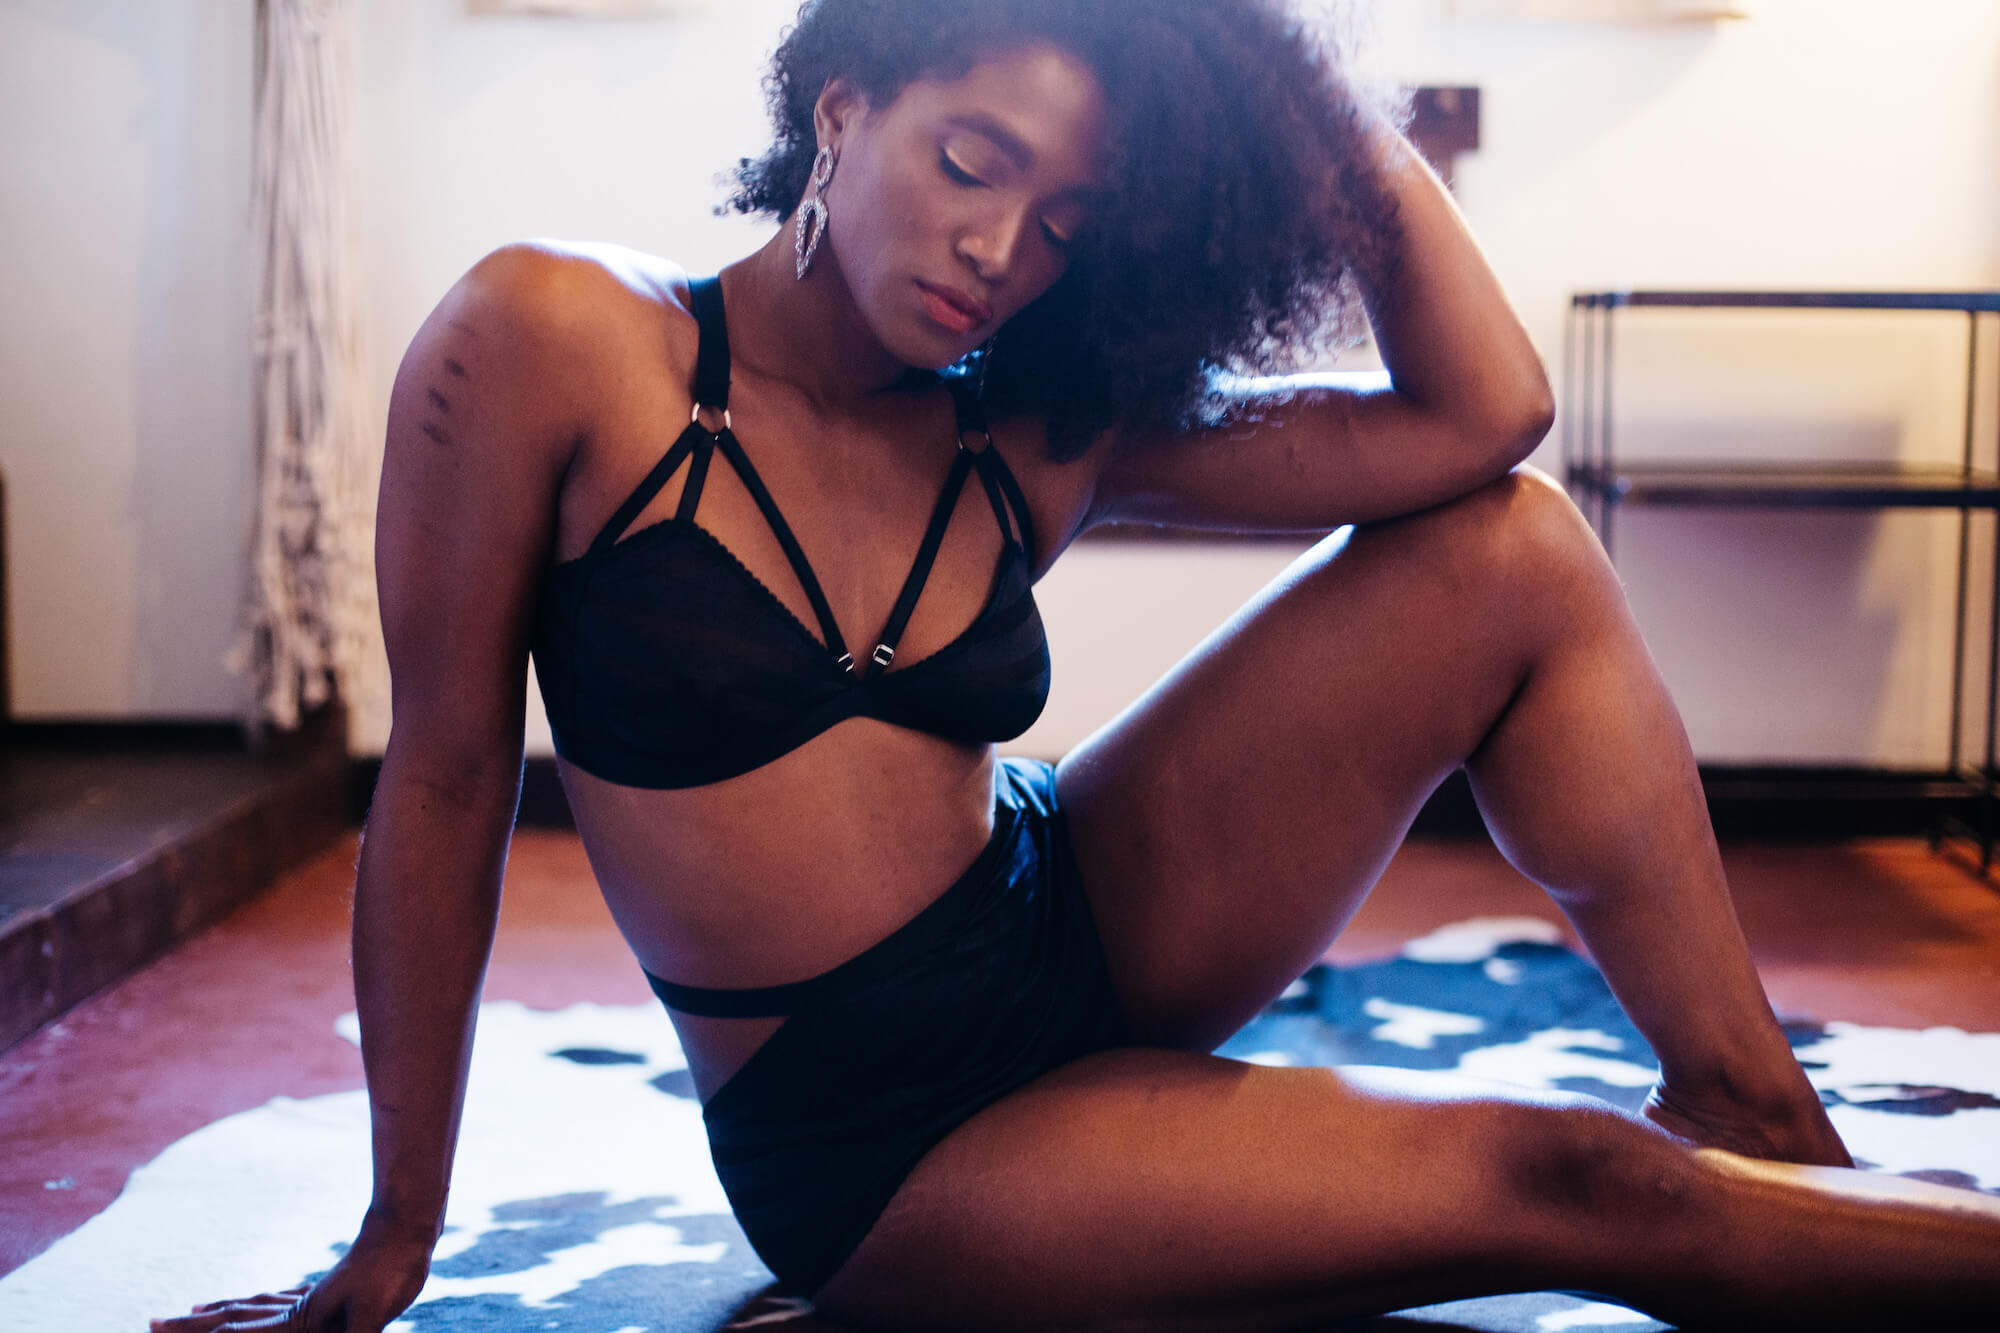 Lingerie Editorial. Michelle Terris Photography. Lonely Lingerie. The Lingerie Addict.